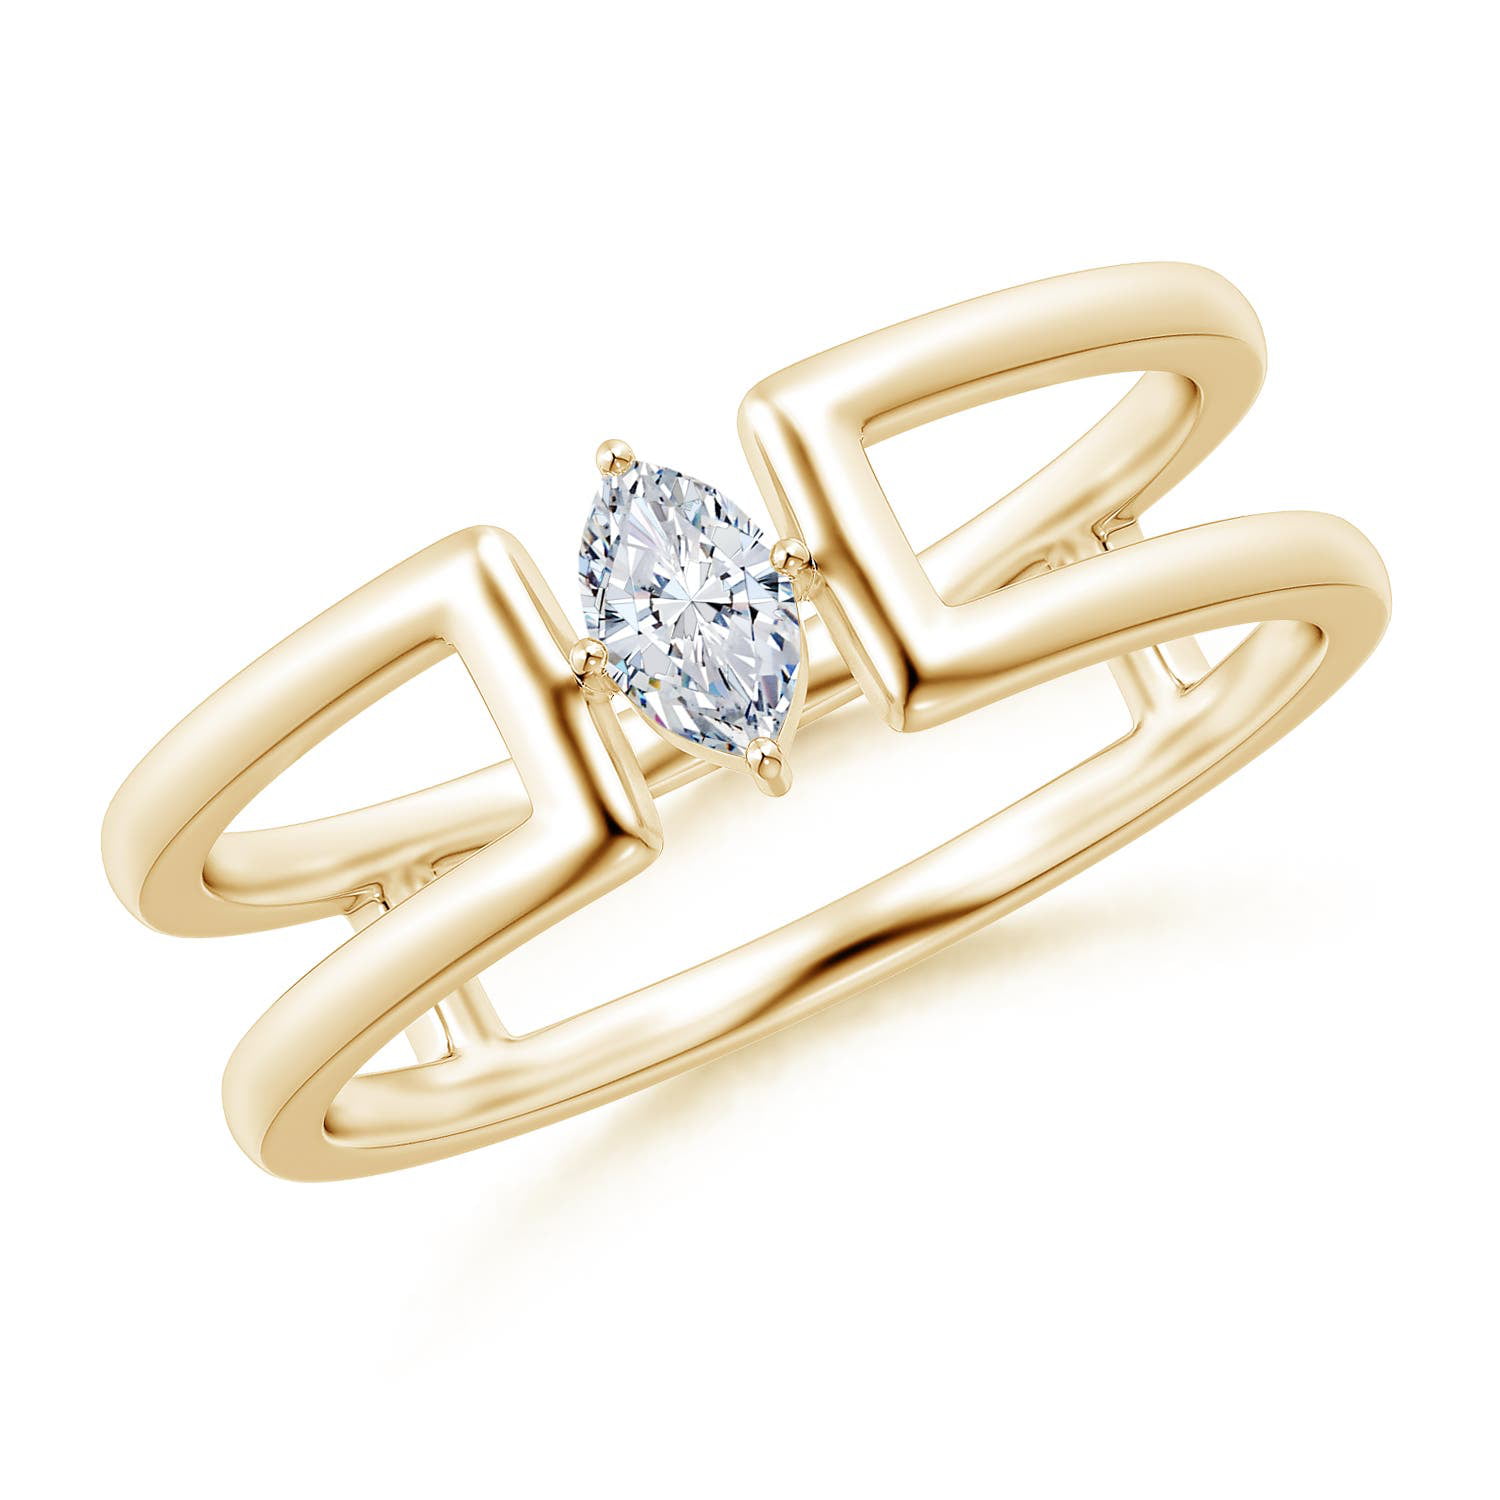 A Shimmer Grace Women Gold Band Ring